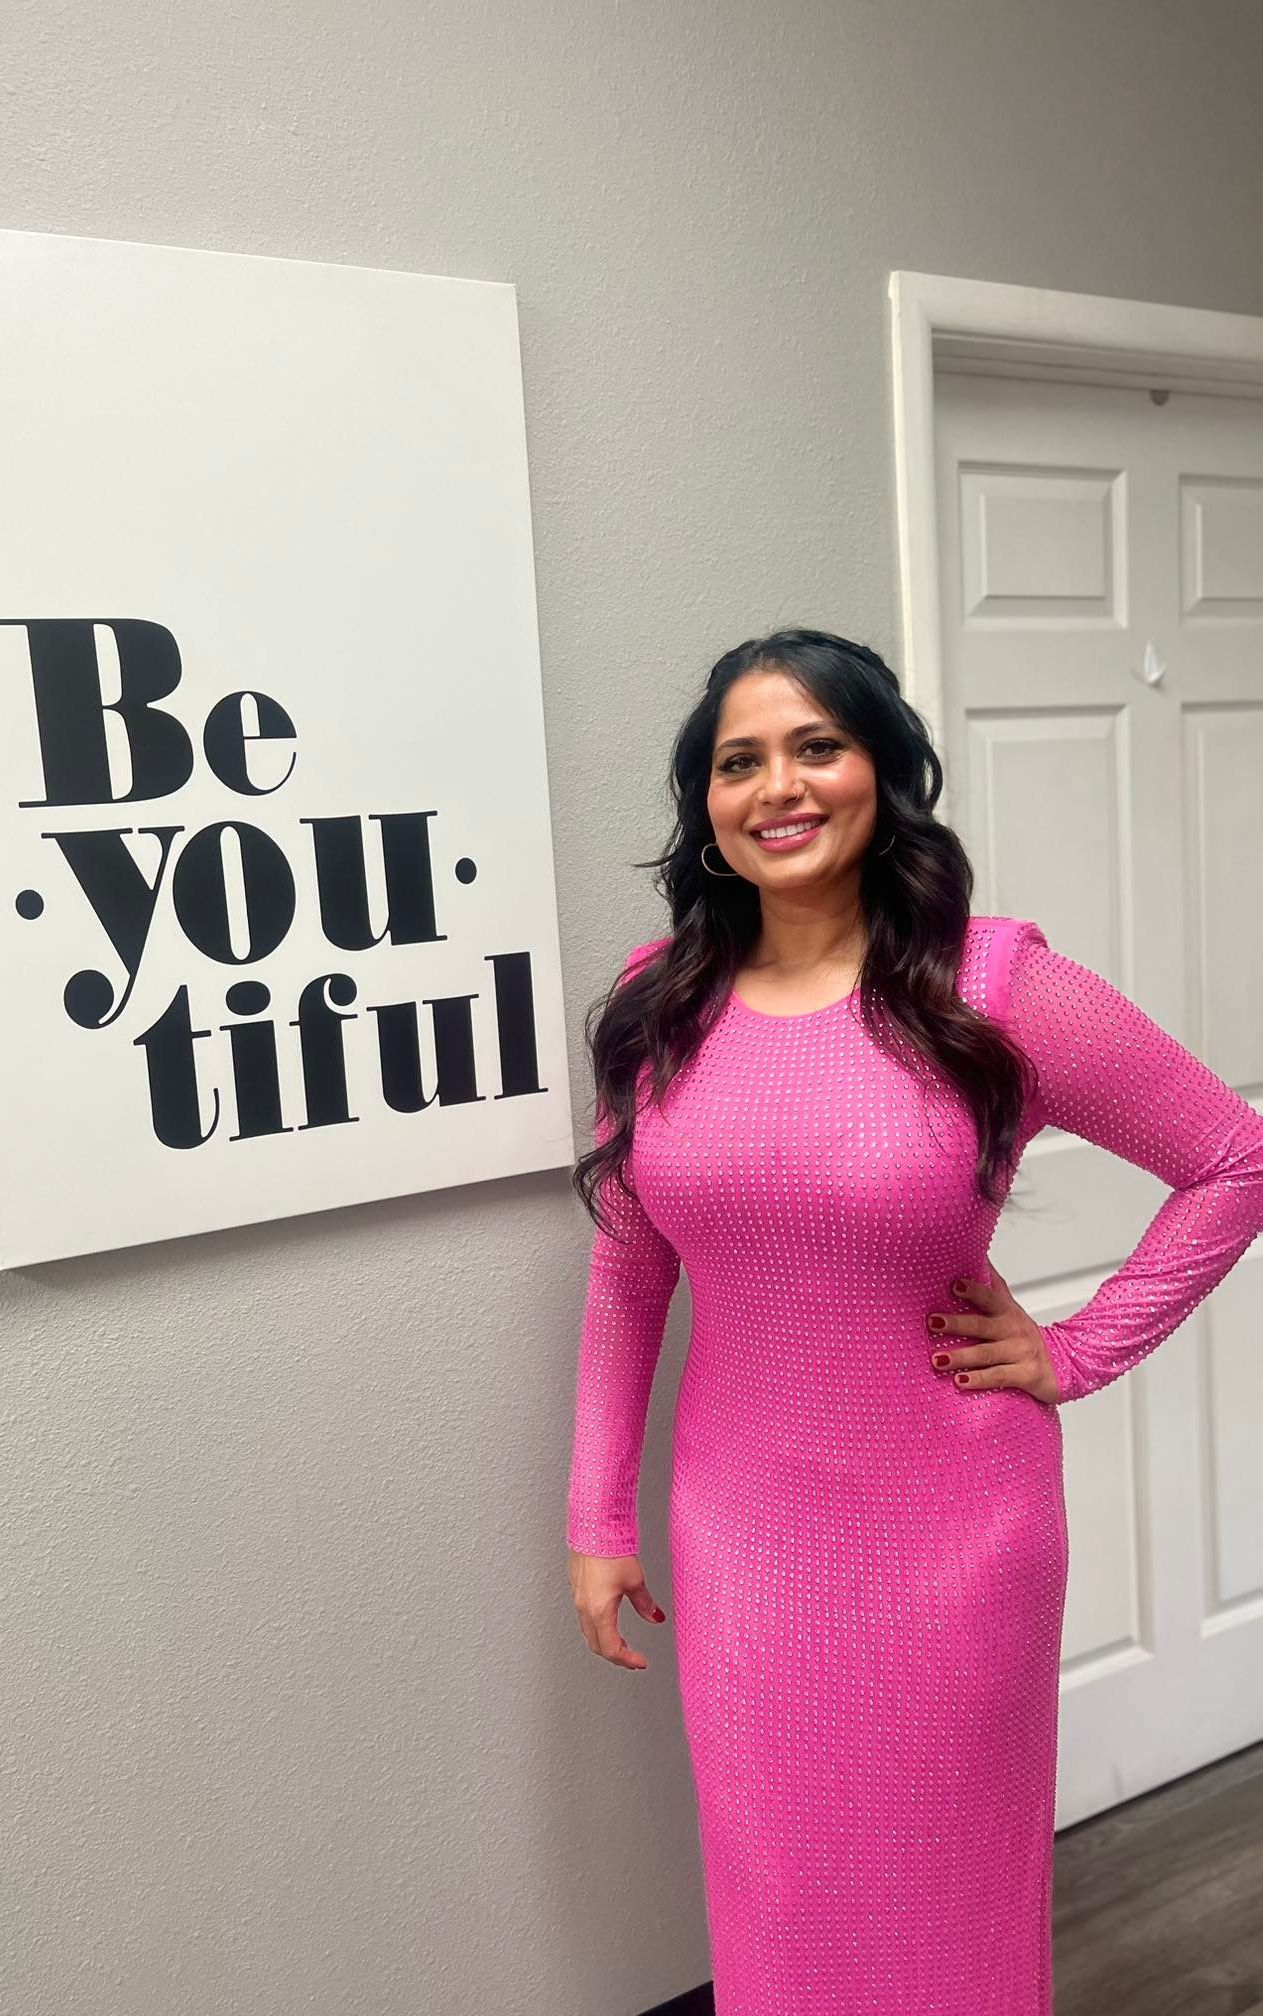 A woman in a pink dress is standing in front of a sign that says `` be youtiful ''.